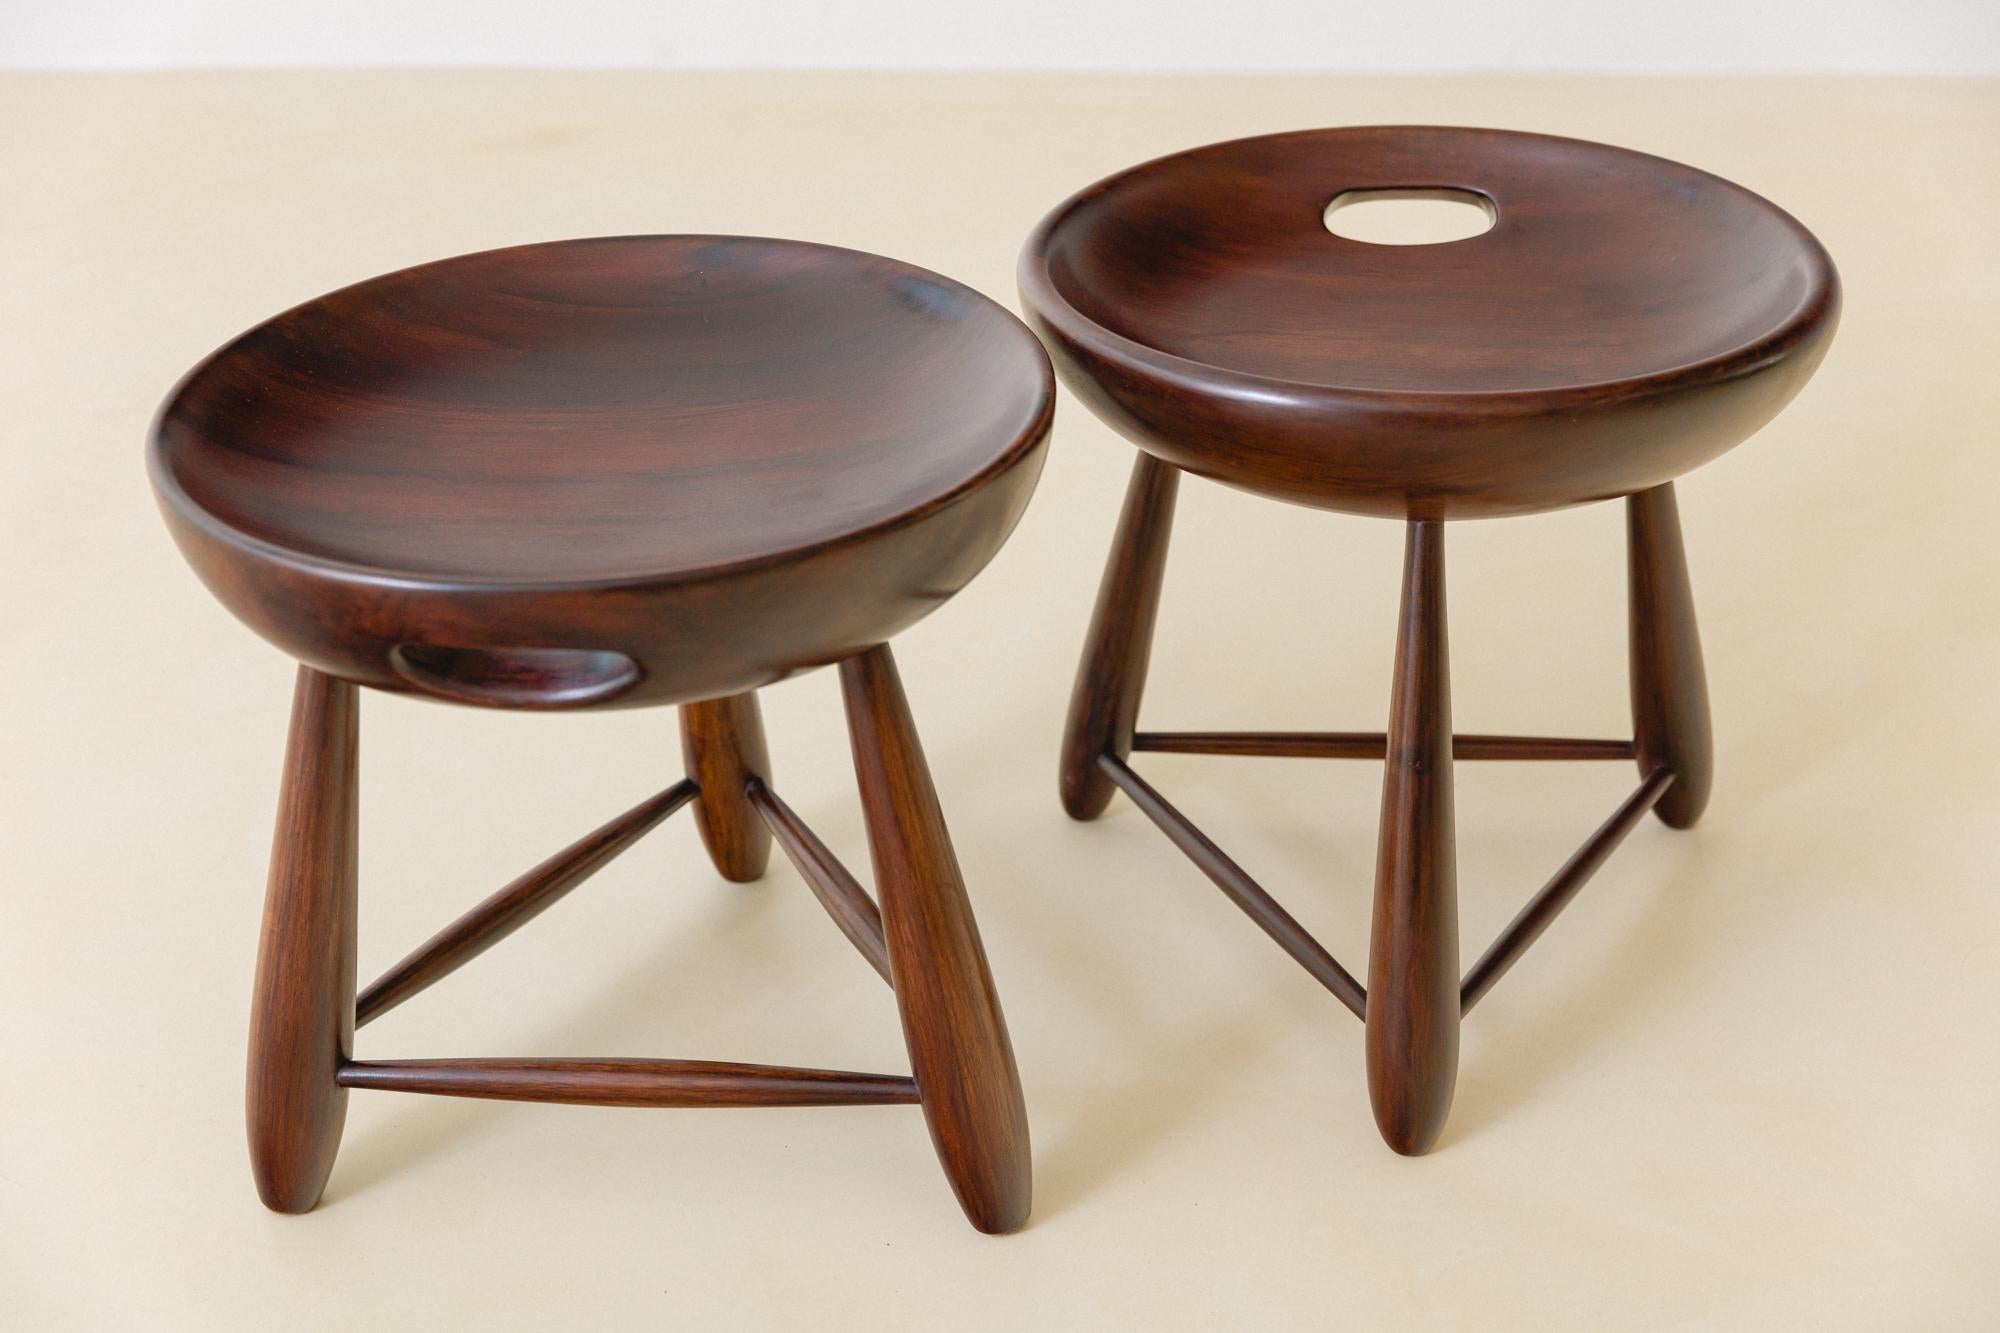 20th Century Pair of Vintage Mocho Stools by Sergio Rodrigues, Brazilian Mid-Century, 1954 For Sale